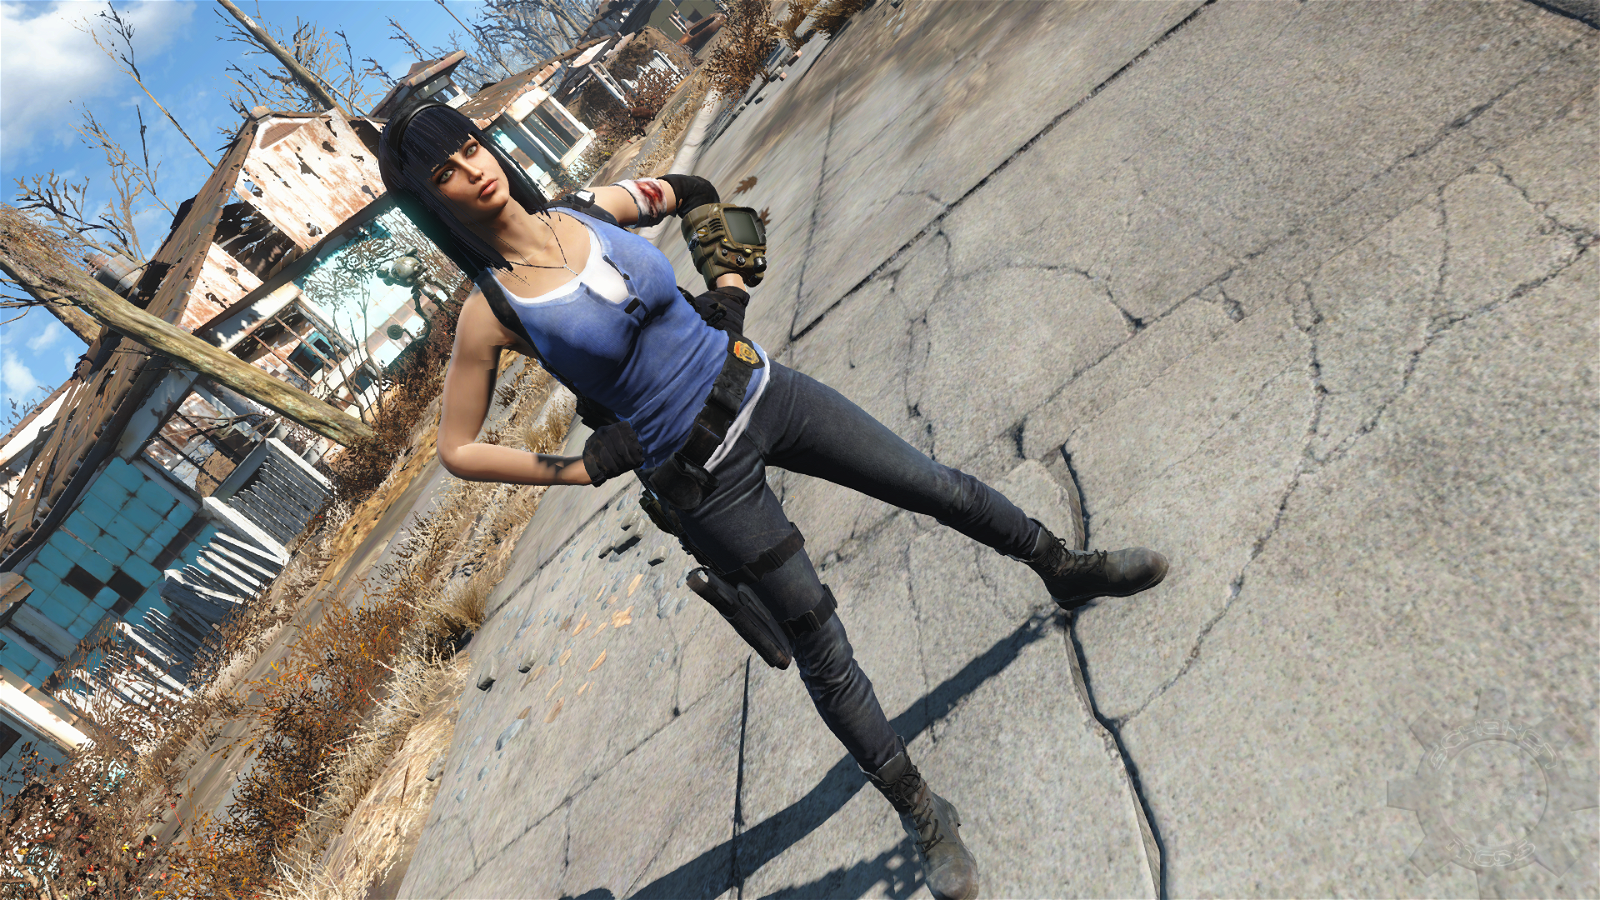 Jill Valentine Outfit (HUF/MAF) with Gun Skill ALL RACES file